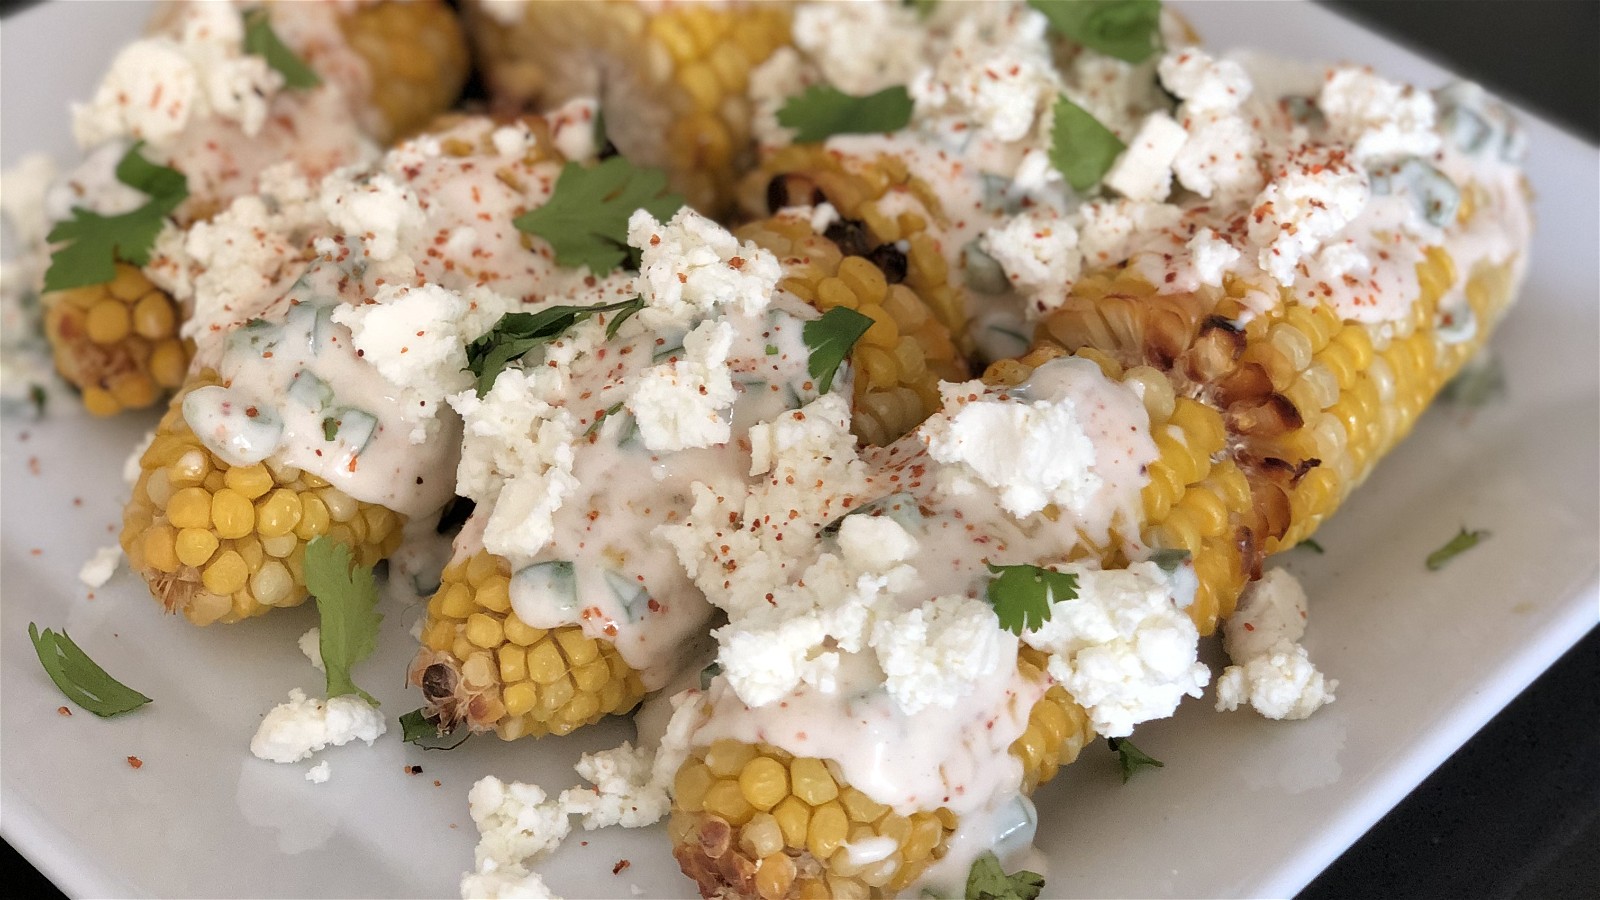 Image of Roasted Mexican Street Corn